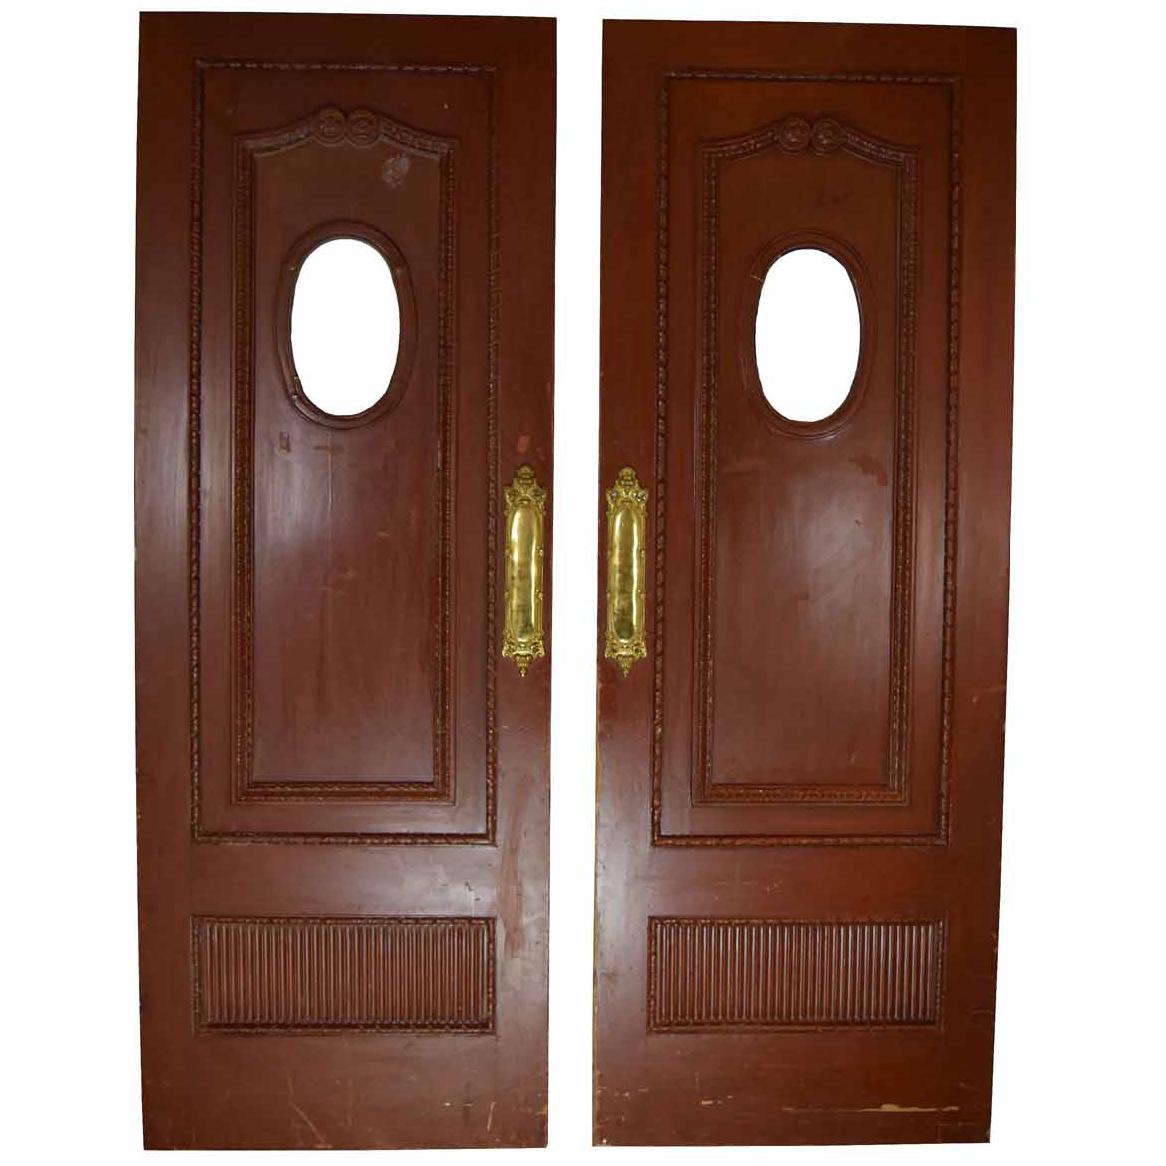 Victorian Entrance Door Pair with Oval Windows